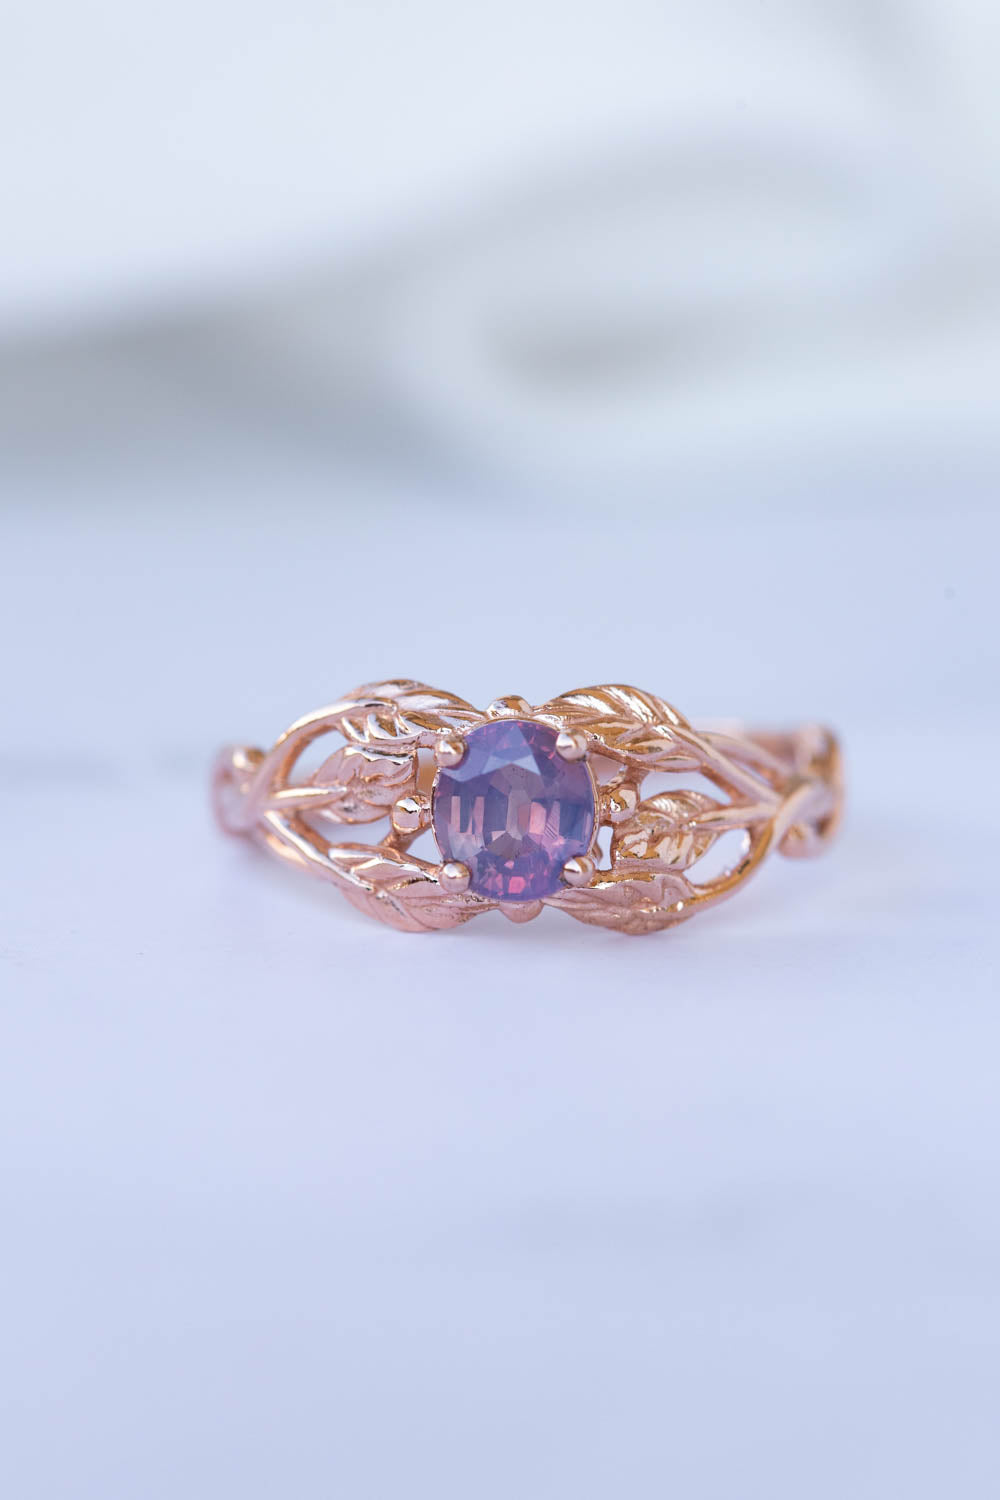 Opalescent sapphire engagement ring, rose gold twig proposal ring with sapphire / Tilia - Eden Garden Jewelry™